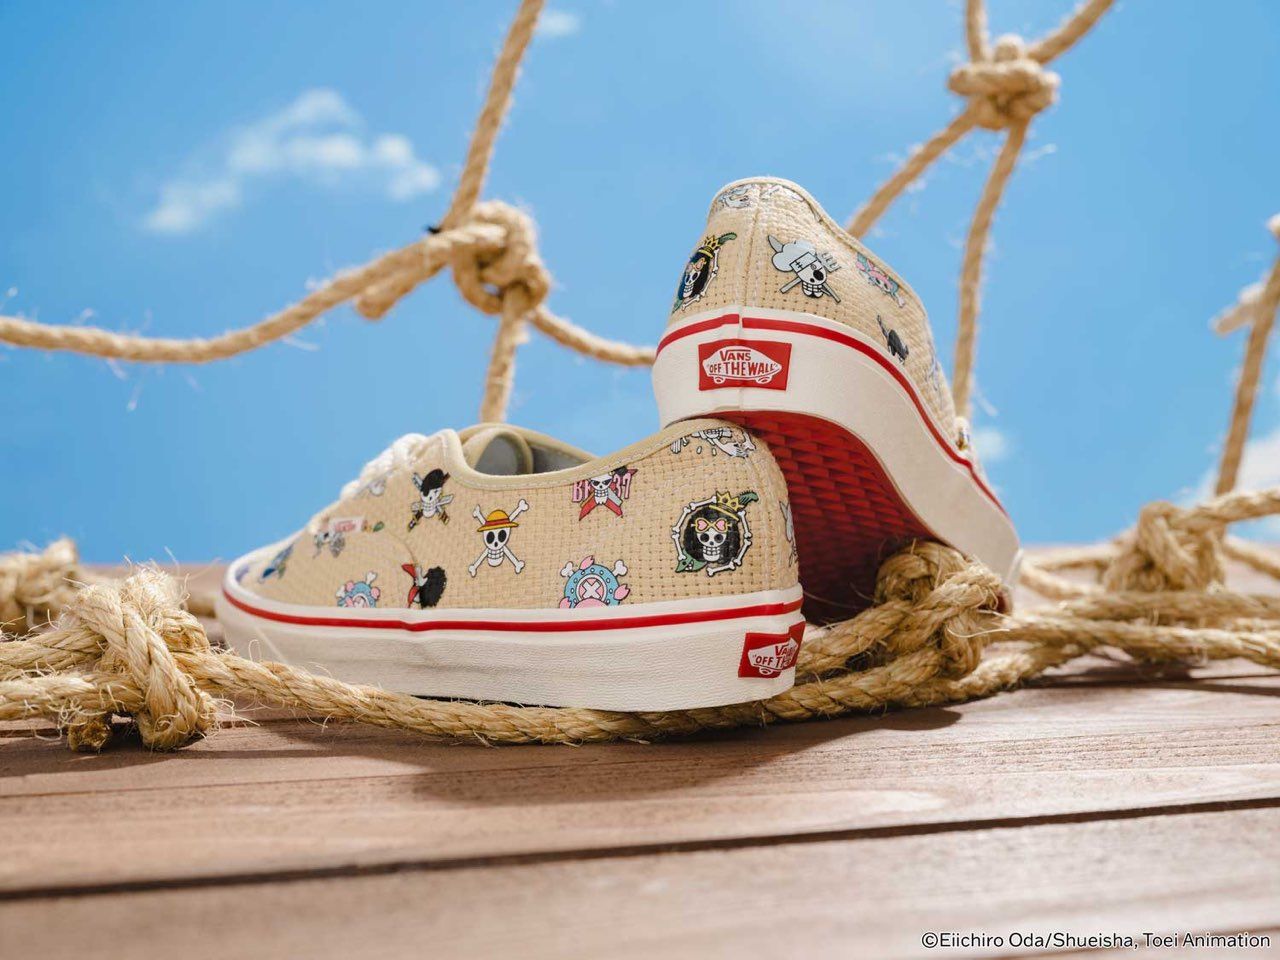 One Piece x Vans Authentic First Look